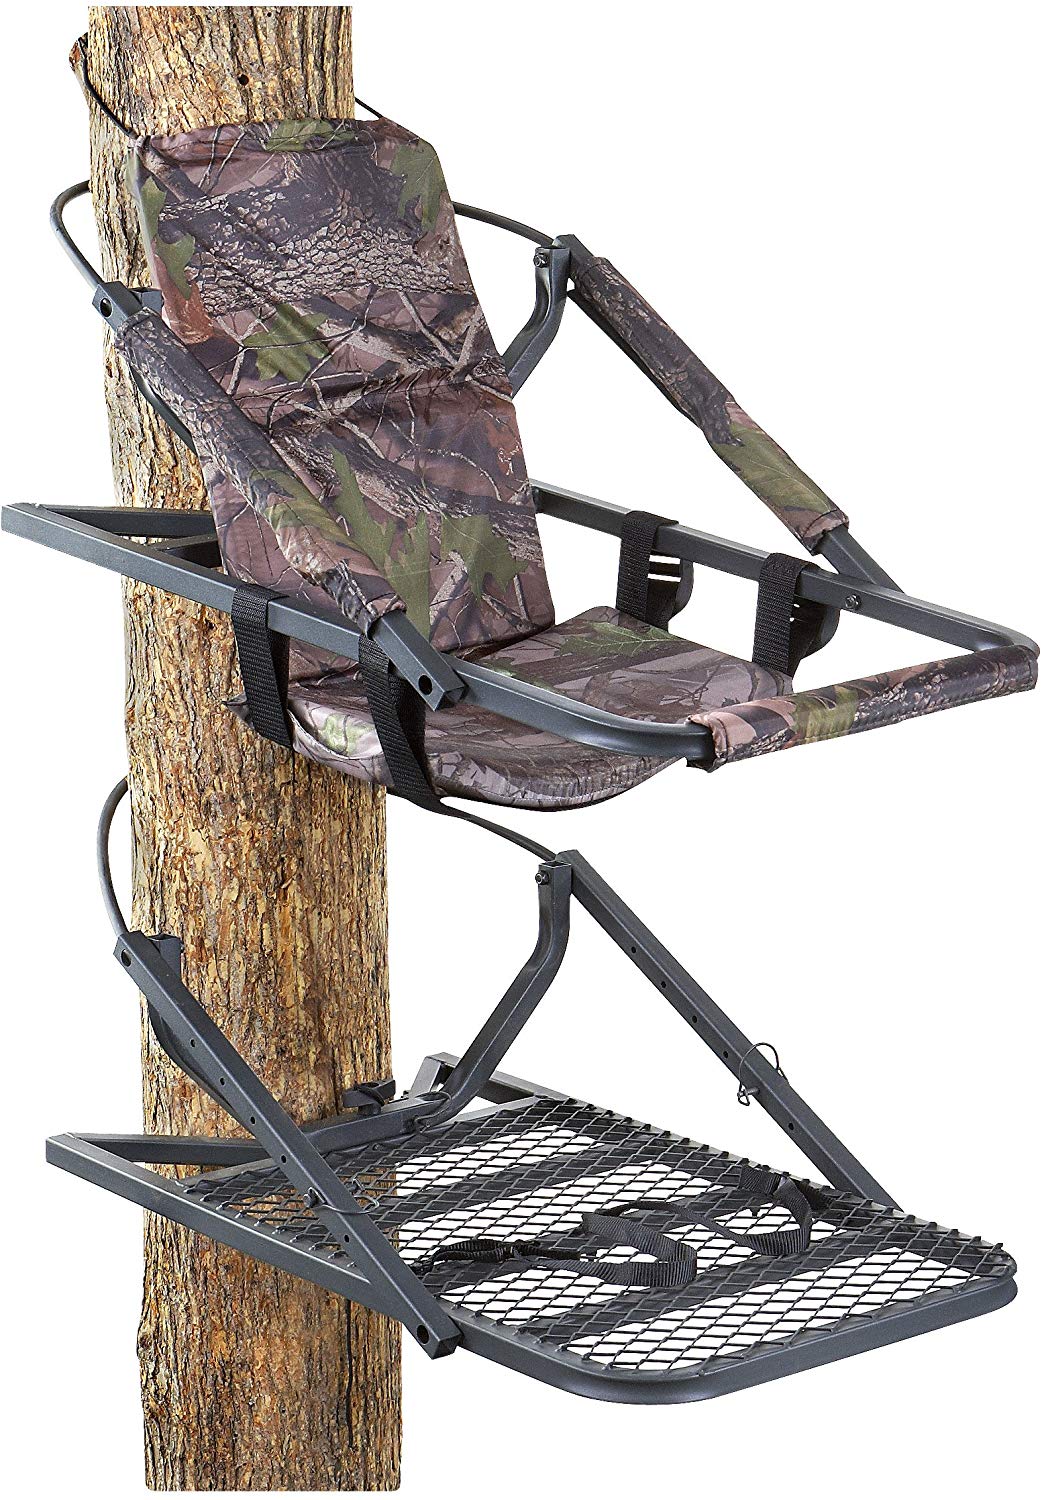 Best Climbing Tree Stand 2020 Buyer's Guide